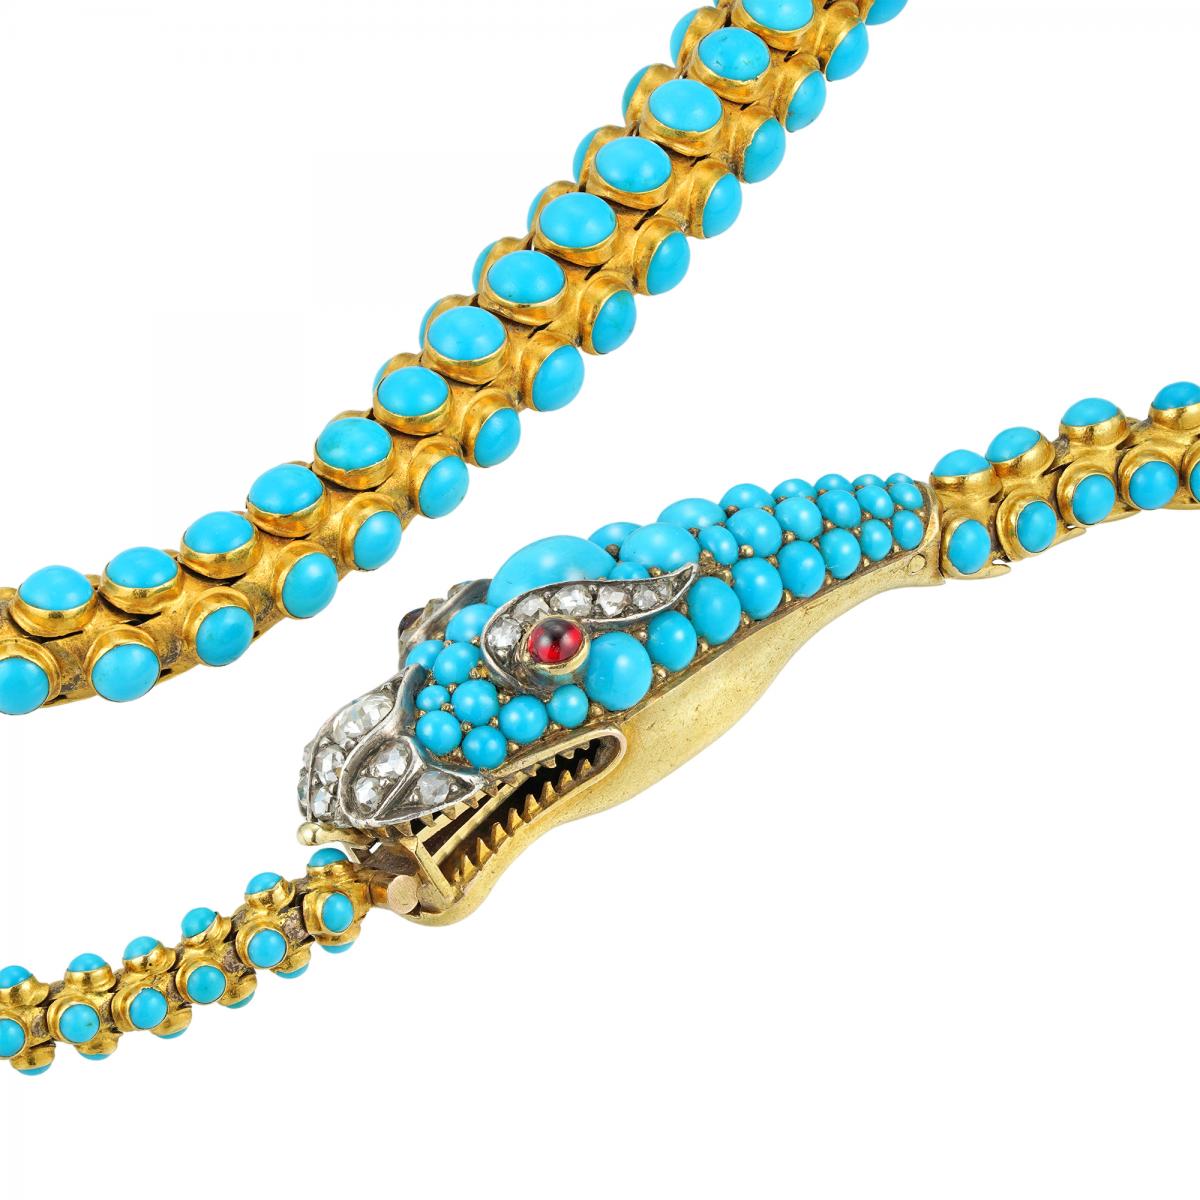 A Victorian Gold and Turquoise Serpent Necklace, Circa 1850